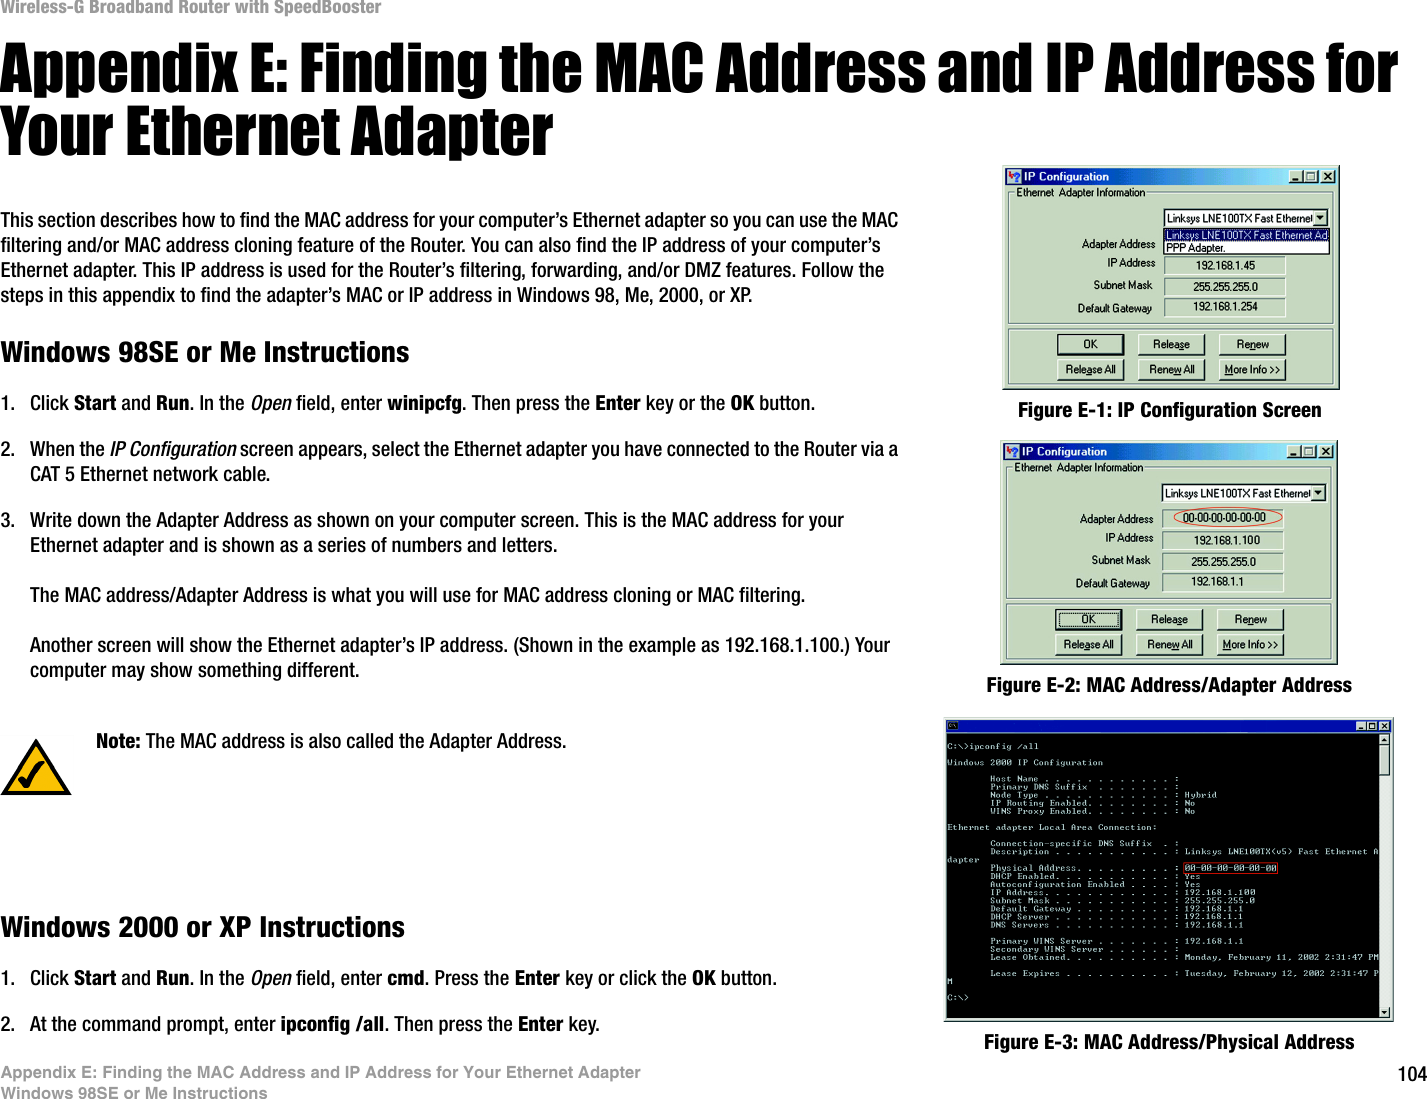 104Appendix E: Finding the MAC Address and IP Address for Your Ethernet AdapterWindows 98SE or Me InstructionsWireless-G Broadband Router with SpeedBoosterAppendix E: Finding the MAC Address and IP Address for Your Ethernet AdapterThis section describes how to find the MAC address for your computer’s Ethernet adapter so you can use the MAC filtering and/or MAC address cloning feature of the Router. You can also find the IP address of your computer’s Ethernet adapter. This IP address is used for the Router’s filtering, forwarding, and/or DMZ features. Follow the steps in this appendix to find the adapter’s MAC or IP address in Windows 98, Me, 2000, or XP.Windows 98SE or Me Instructions1. Click Start and Run. In the Open field, enter winipcfg. Then press the Enter key or the OK button. 2. When the IP Configuration screen appears, select the Ethernet adapter you have connected to the Router via a CAT 5 Ethernet network cable.3. Write down the Adapter Address as shown on your computer screen. This is the MAC address for your Ethernet adapter and is shown as a series of numbers and letters.The MAC address/Adapter Address is what you will use for MAC address cloning or MAC filtering.Another screen will show the Ethernet adapter’s IP address. (Shown in the example as 192.168.1.100.) Your computer may show something different.Windows 2000 or XP Instructions1. Click Start and Run. In the Open field, enter cmd. Press the Enter key or click the OK button.2. At the command prompt, enter ipconfig /all. Then press the Enter key.Figure E-2: MAC Address/Adapter AddressFigure E-1: IP Configuration ScreenNote: The MAC address is also called the Adapter Address.Figure E-3: MAC Address/Physical Address